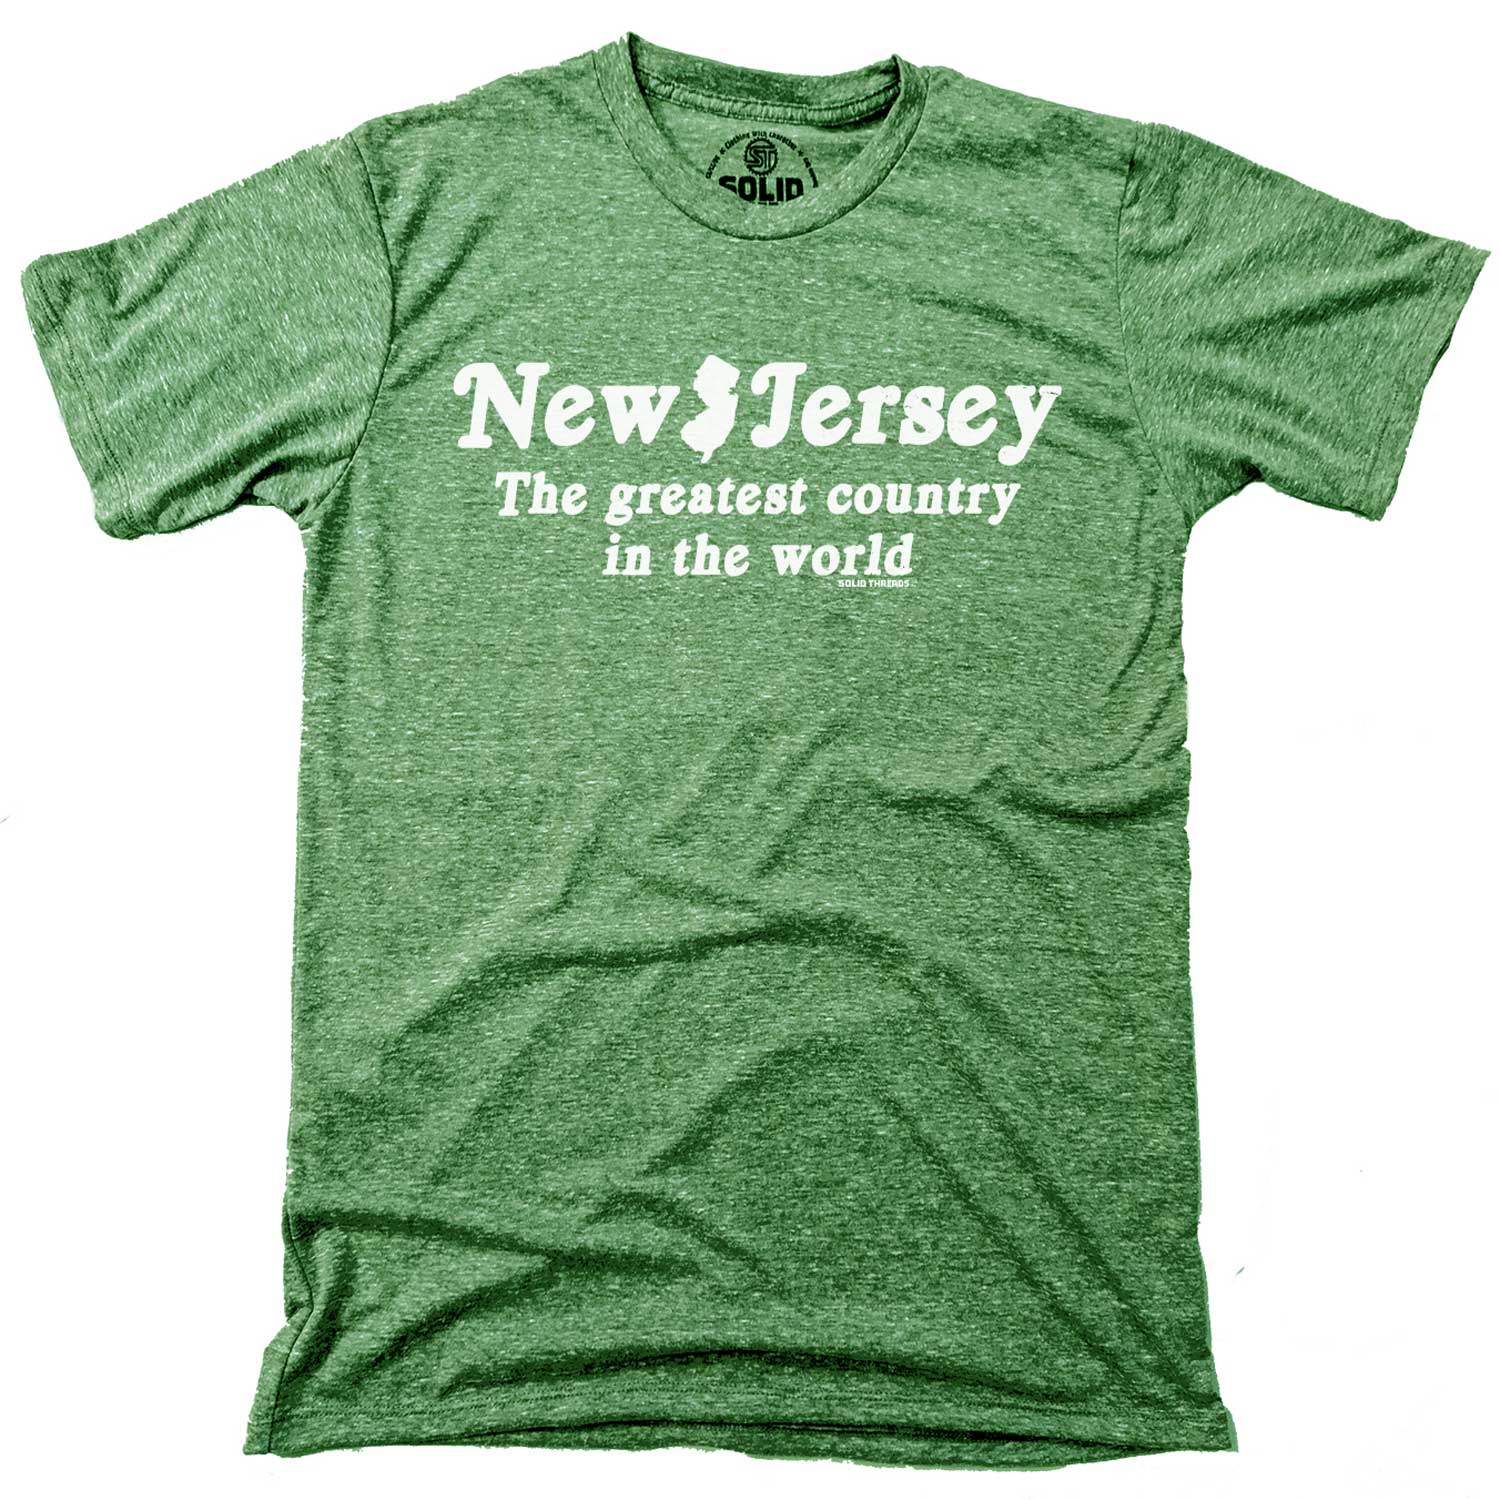 Men's NJ Greatest Country Vintage Graphic T-Shirt | Funny Garden State Triblend Tee | Solid Threads